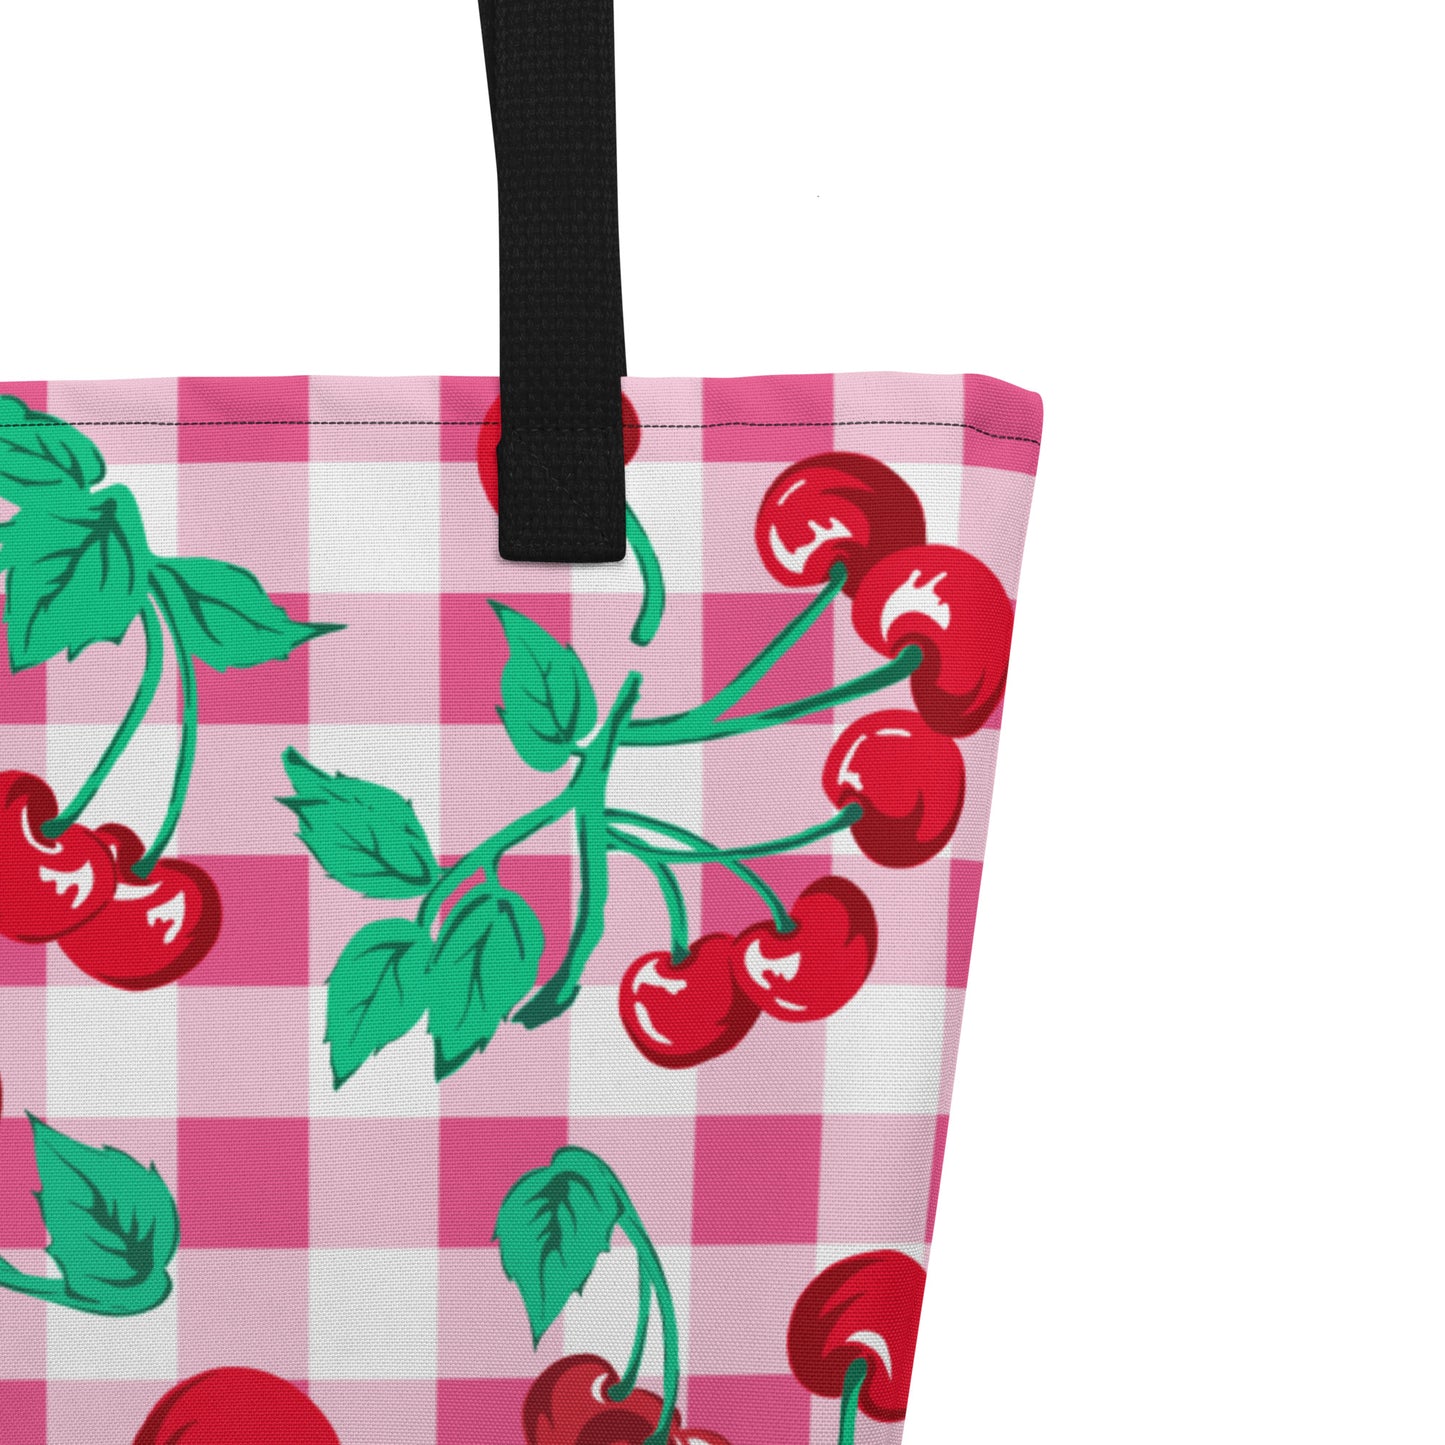 Bethany Cherry Girl Pink Gingham Oversized Tote Bag | Pinup Couture Relaxed